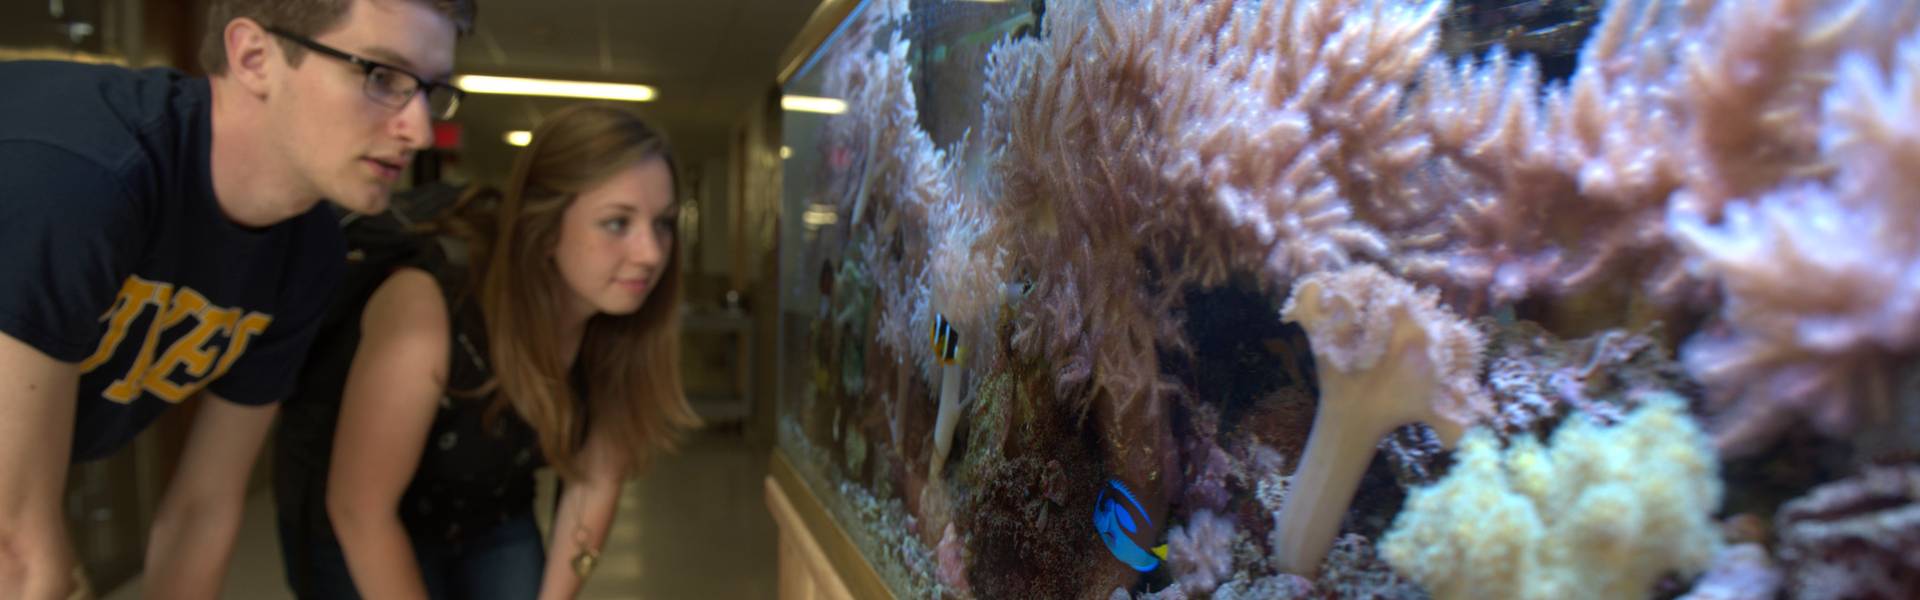 Two students crouch down and look at a fish tank in Phillips Hall.